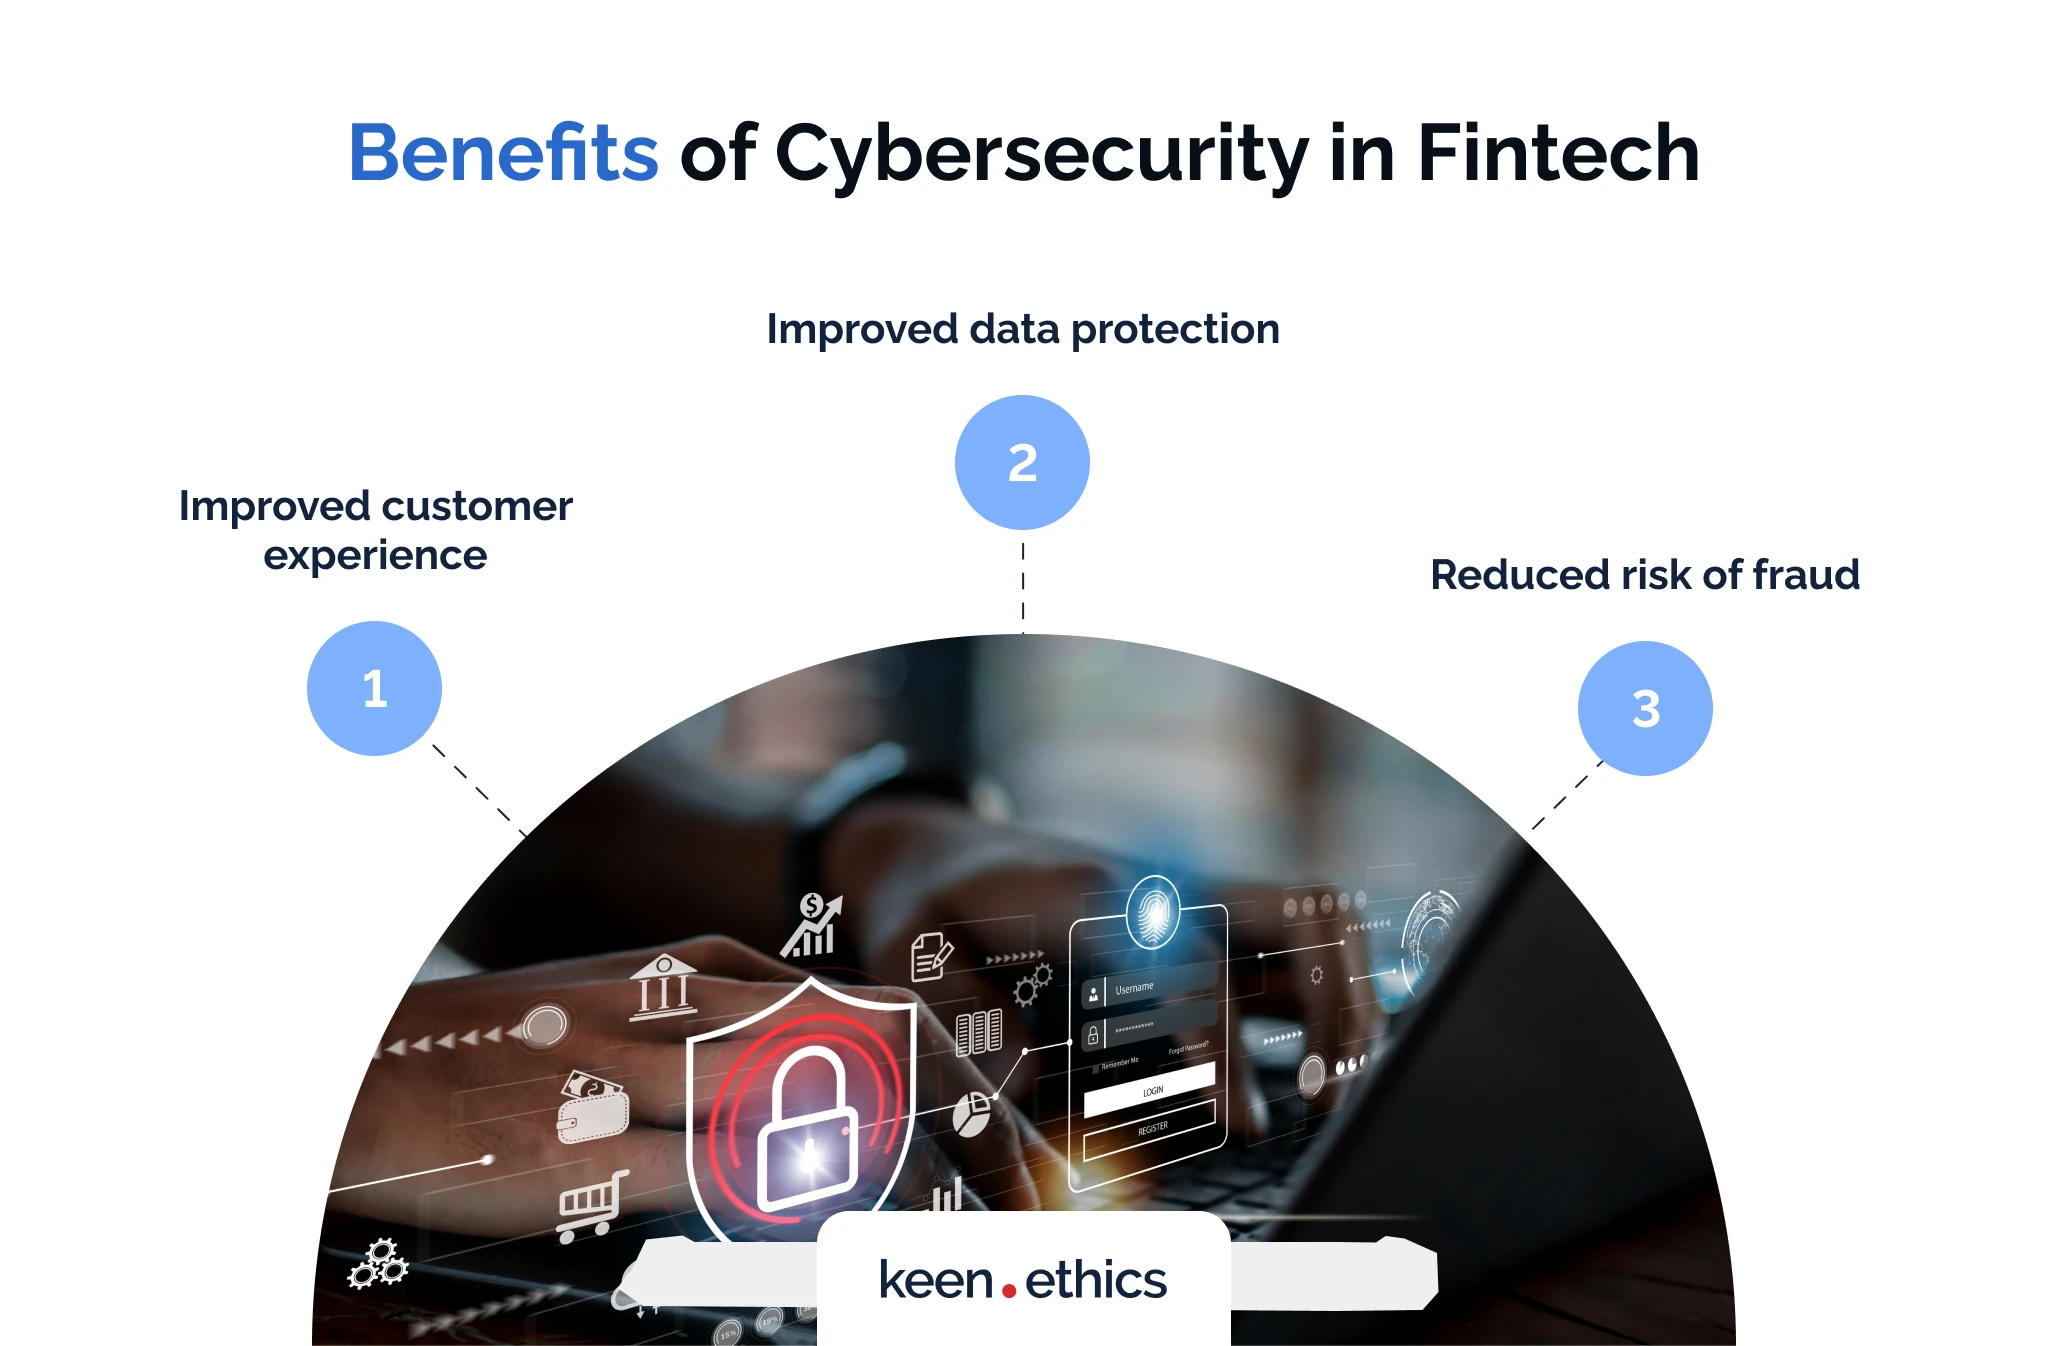 Benefits of cybersecurity in fintech